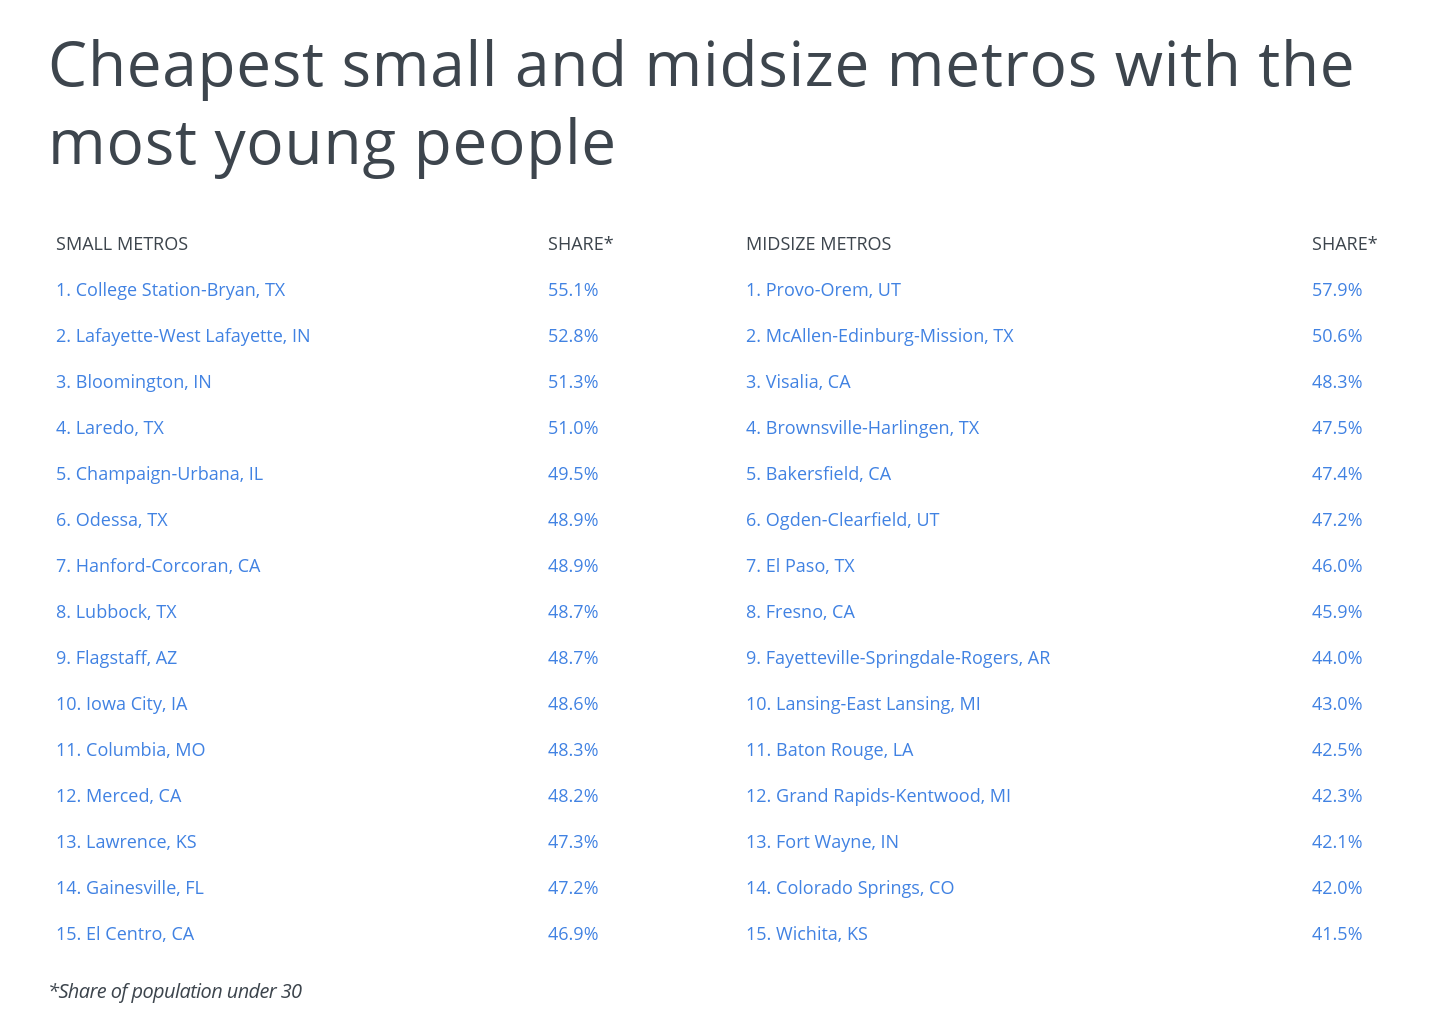 Cheapest small and midsize metros with the most young people